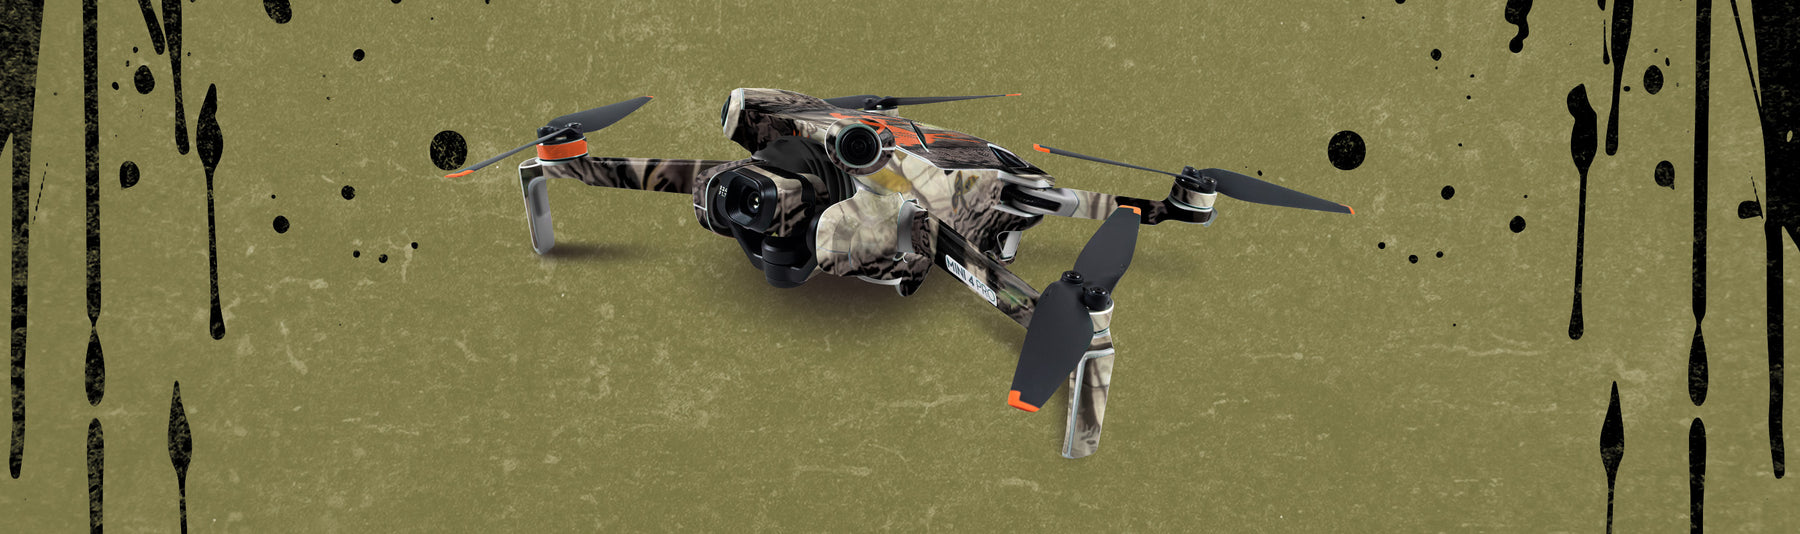 The Best Drones for Hunting Deer: From Scouting to Recovery